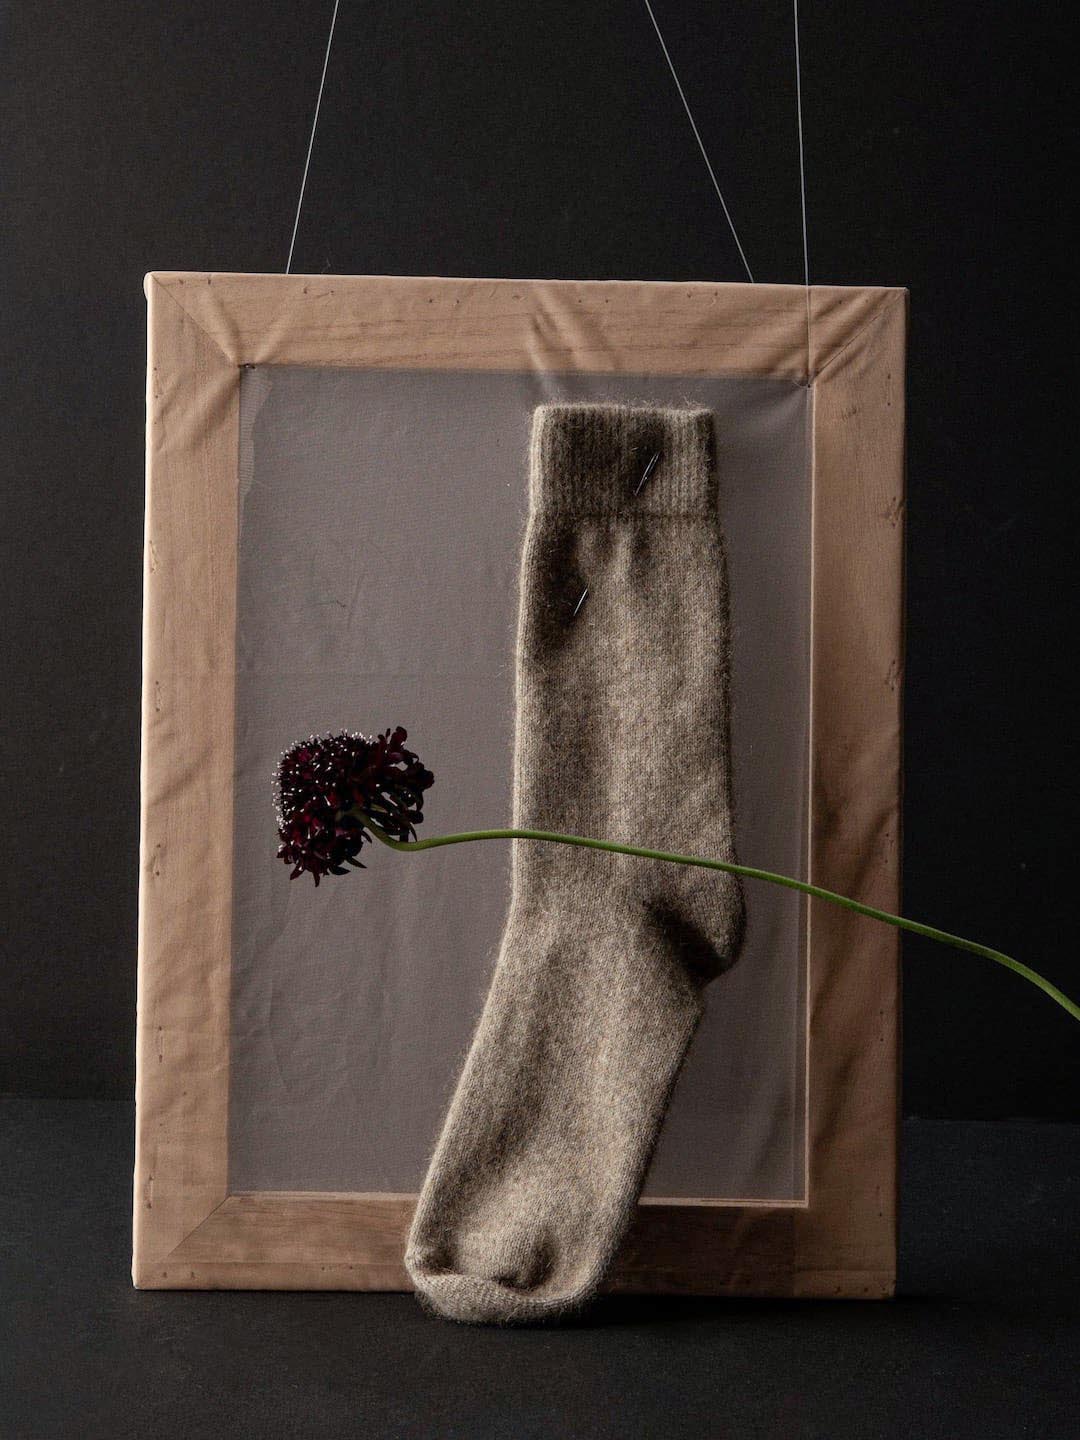 A single Possum Merino sock, made from New Zealand merino wool, is displayed in a wooden frame, accompanied by a stem with a dark flower, against a black background.